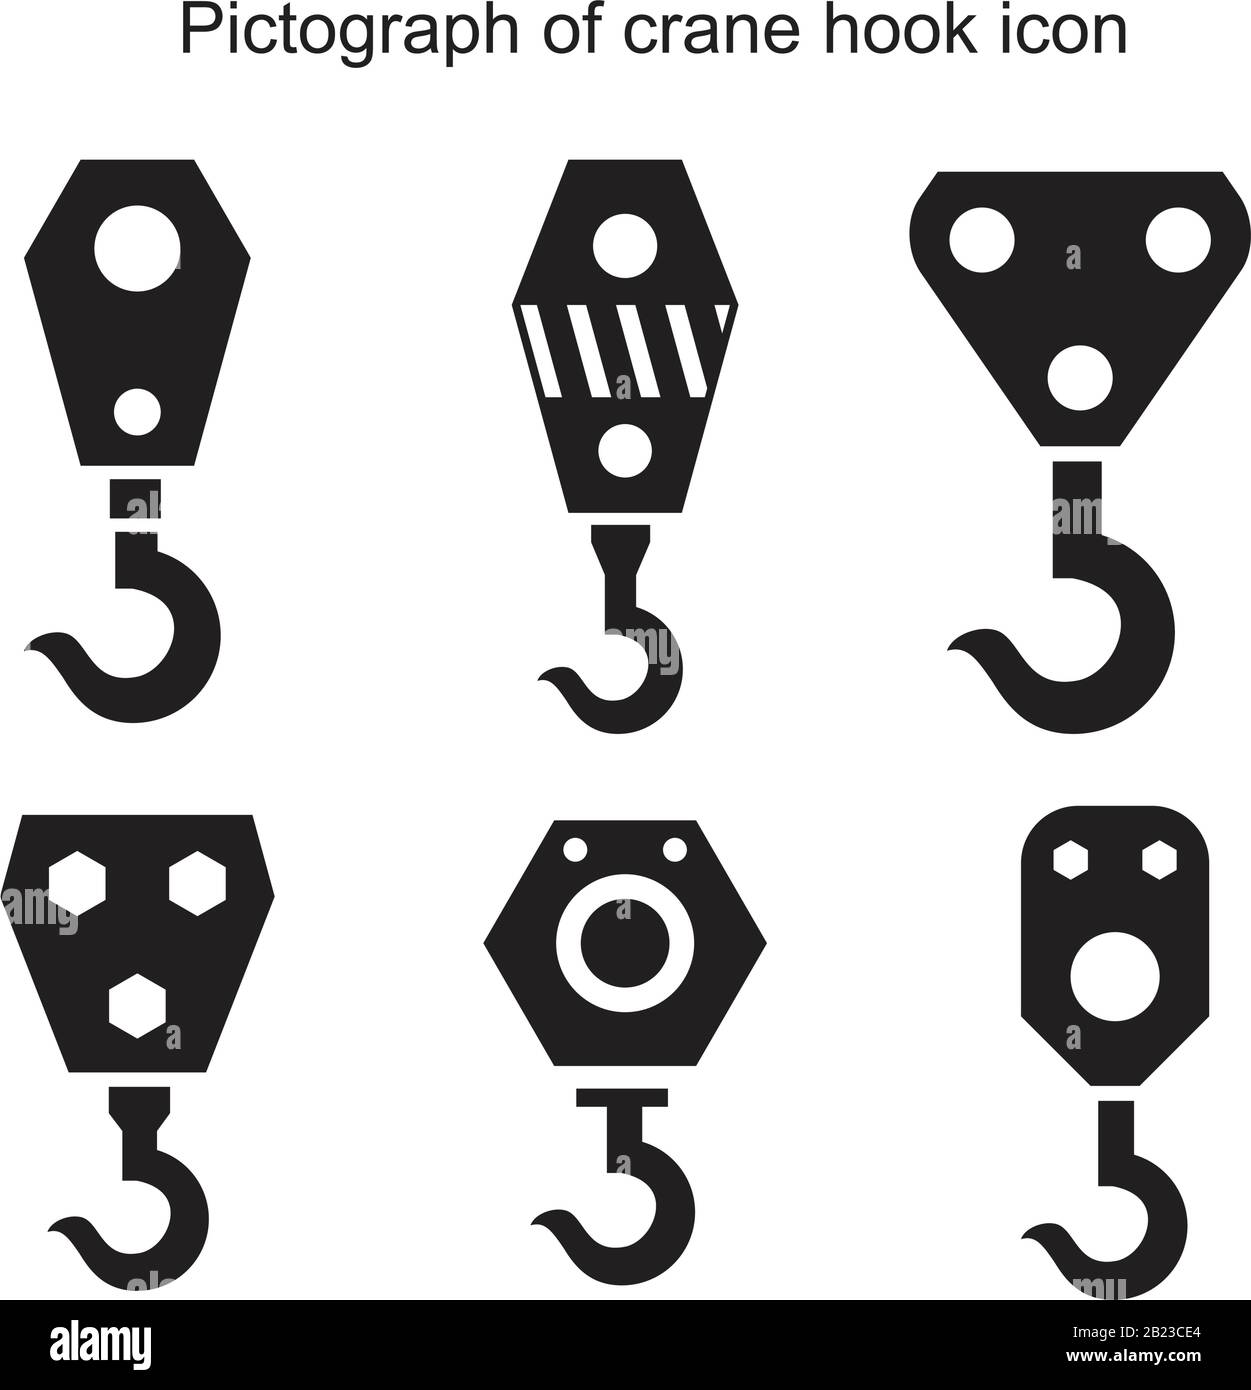 https://c8.alamy.com/comp/2B23CE4/pictograph-of-crane-hook-icon-template-black-color-editable-pictograph-of-crane-hook-icon-symbol-flat-vector-illustration-for-graphic-and-web-design-2B23CE4.jpg